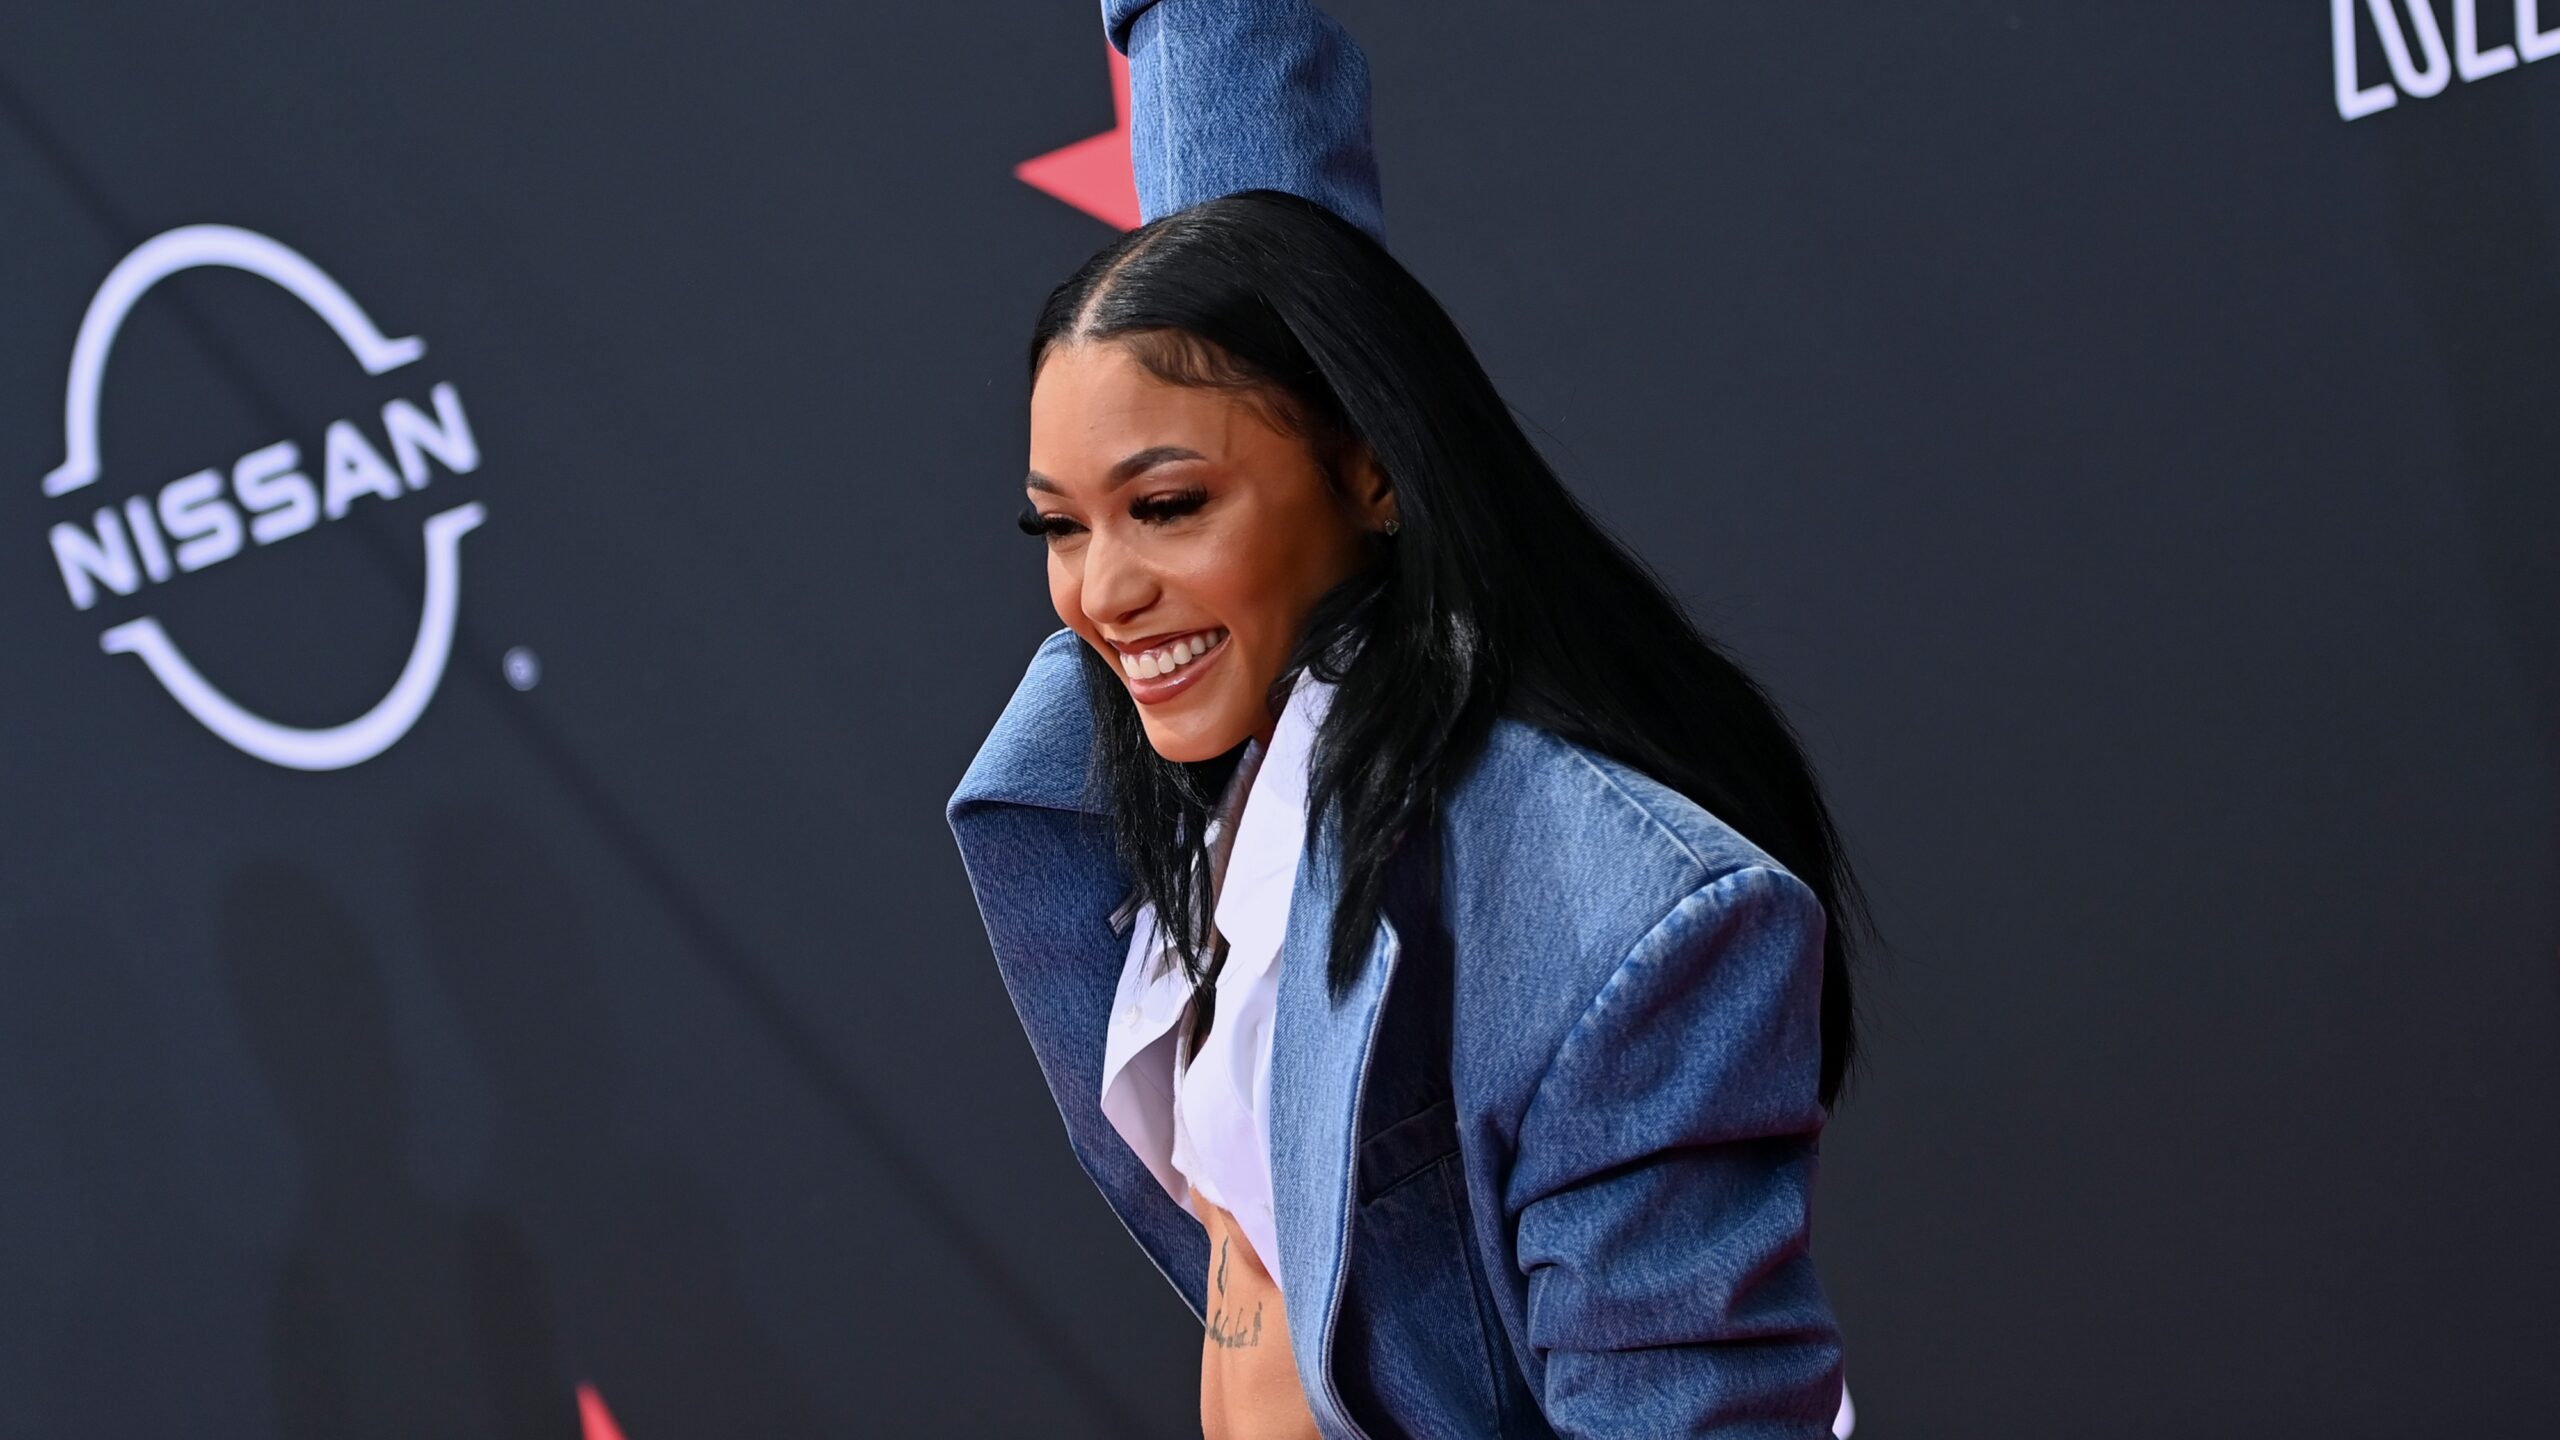 Coi Leray’s Stylist Shares The Inspiration Behind Her ‘Fearless’ Denim Look At The 2022 BET Awards